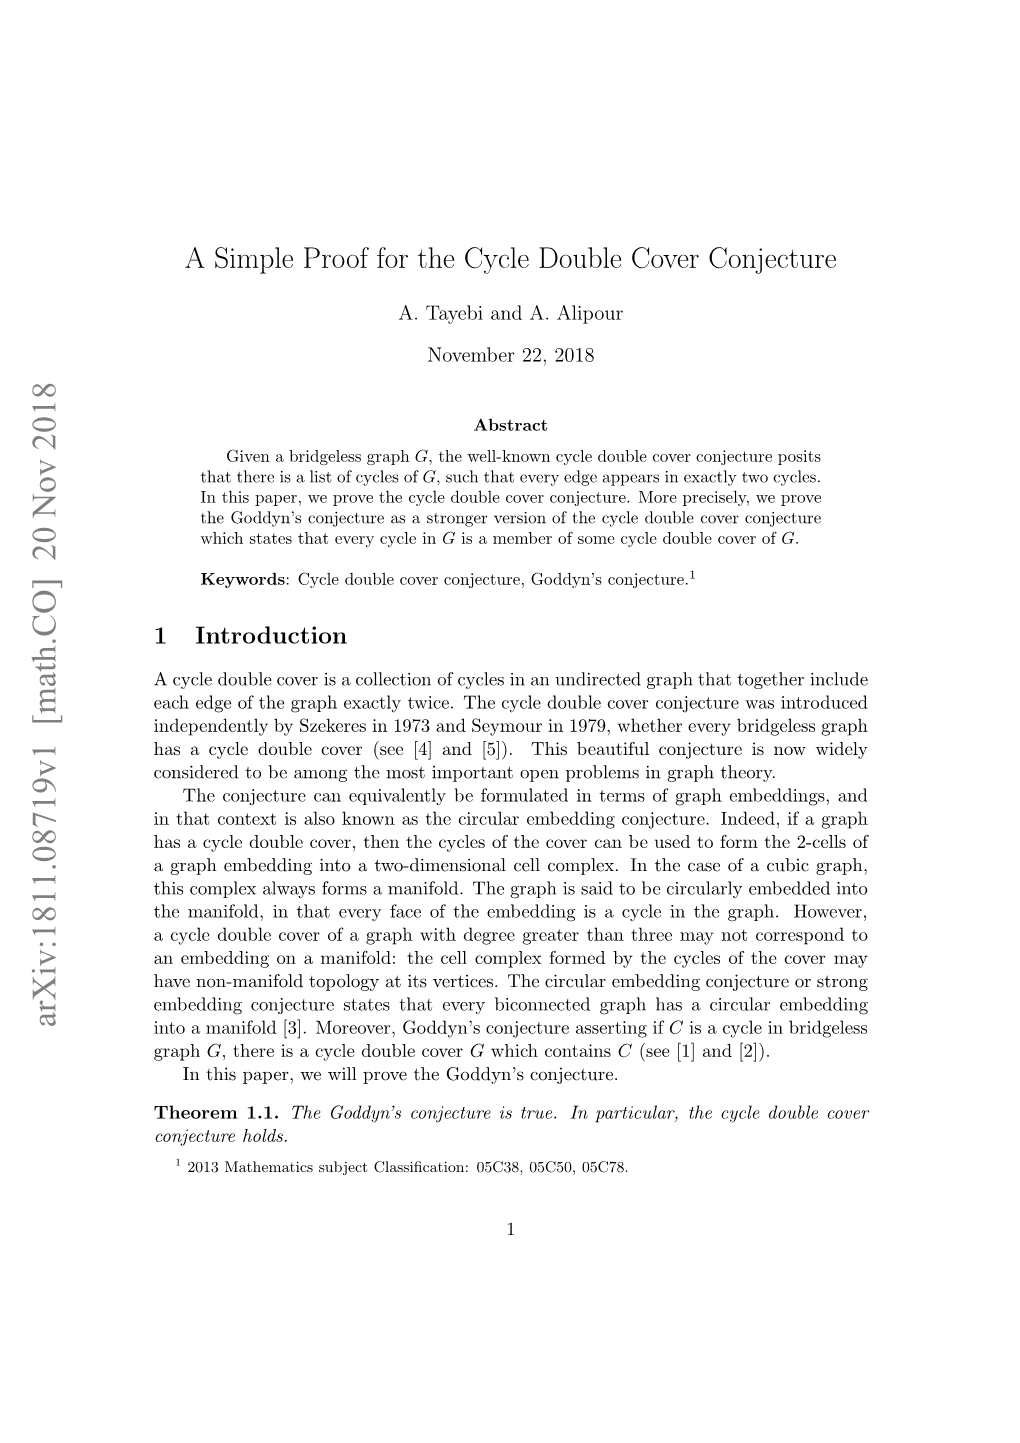 A Simple Proof for the Cycle Double Cover Conjecture